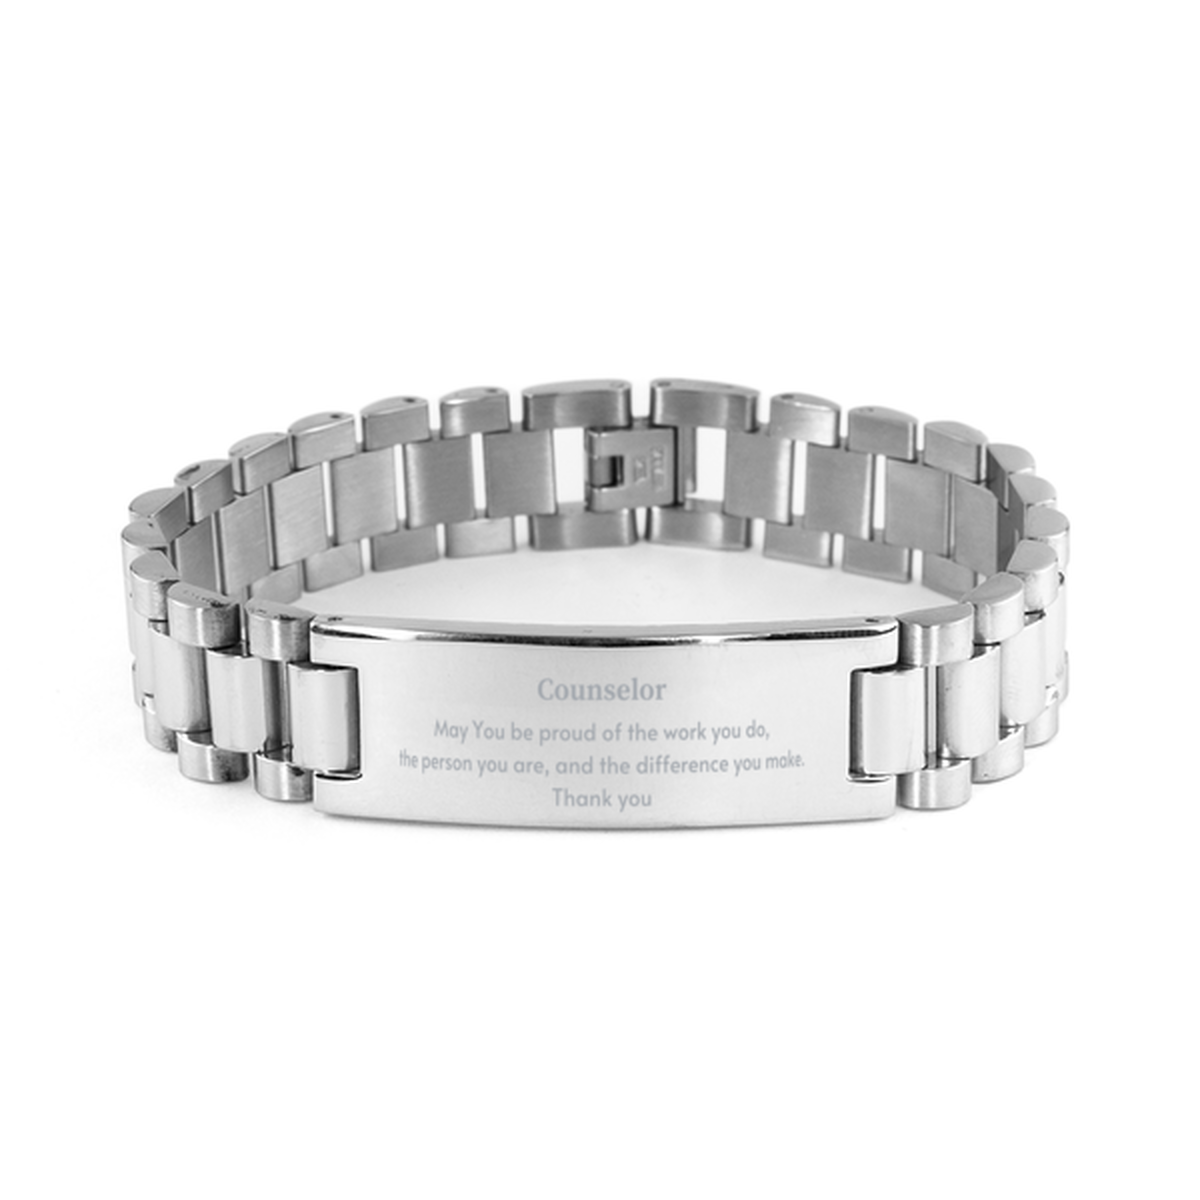 Heartwarming Ladder Stainless Steel Bracelet Retirement Coworkers Gifts for Counselor, Counselor May You be proud of the work you do, the person you are Gifts for Boss Men Women Friends